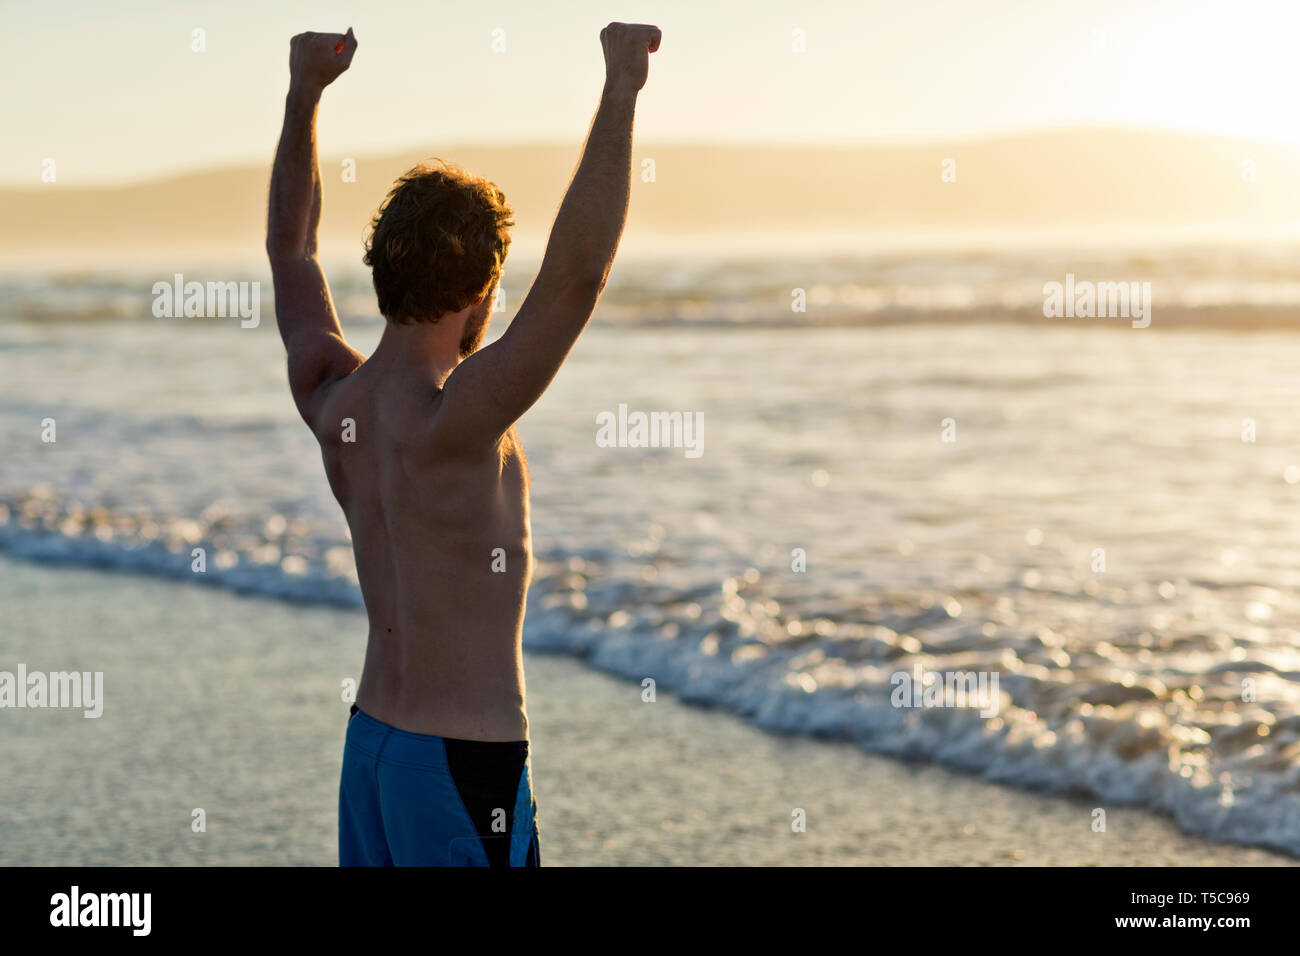 Man looking out to sea with arms raised. Stock Photo